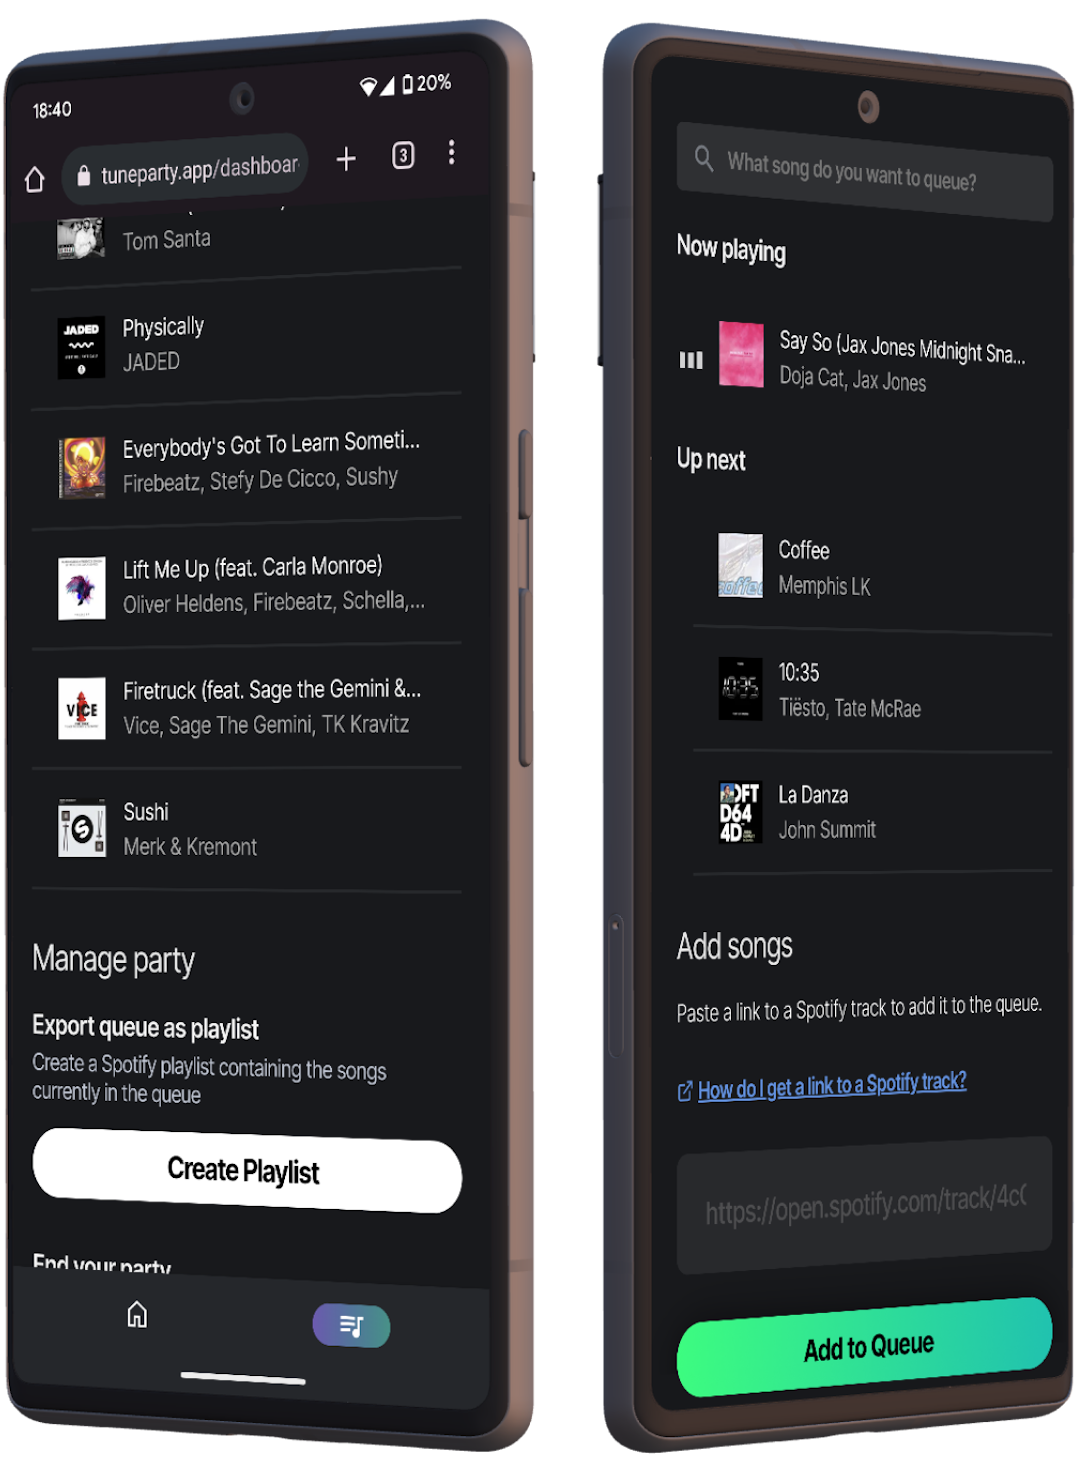 Two smartphones side-by-side. The screen on the left shows part of the Dashboard page, with upcoming songs  in the queue and party management controls being displayed. The screen on the right shows part of the Party page  where a search bar, the currently playing song, the next 3 songs, and a text field to paste a Spotify track link  can be seen.